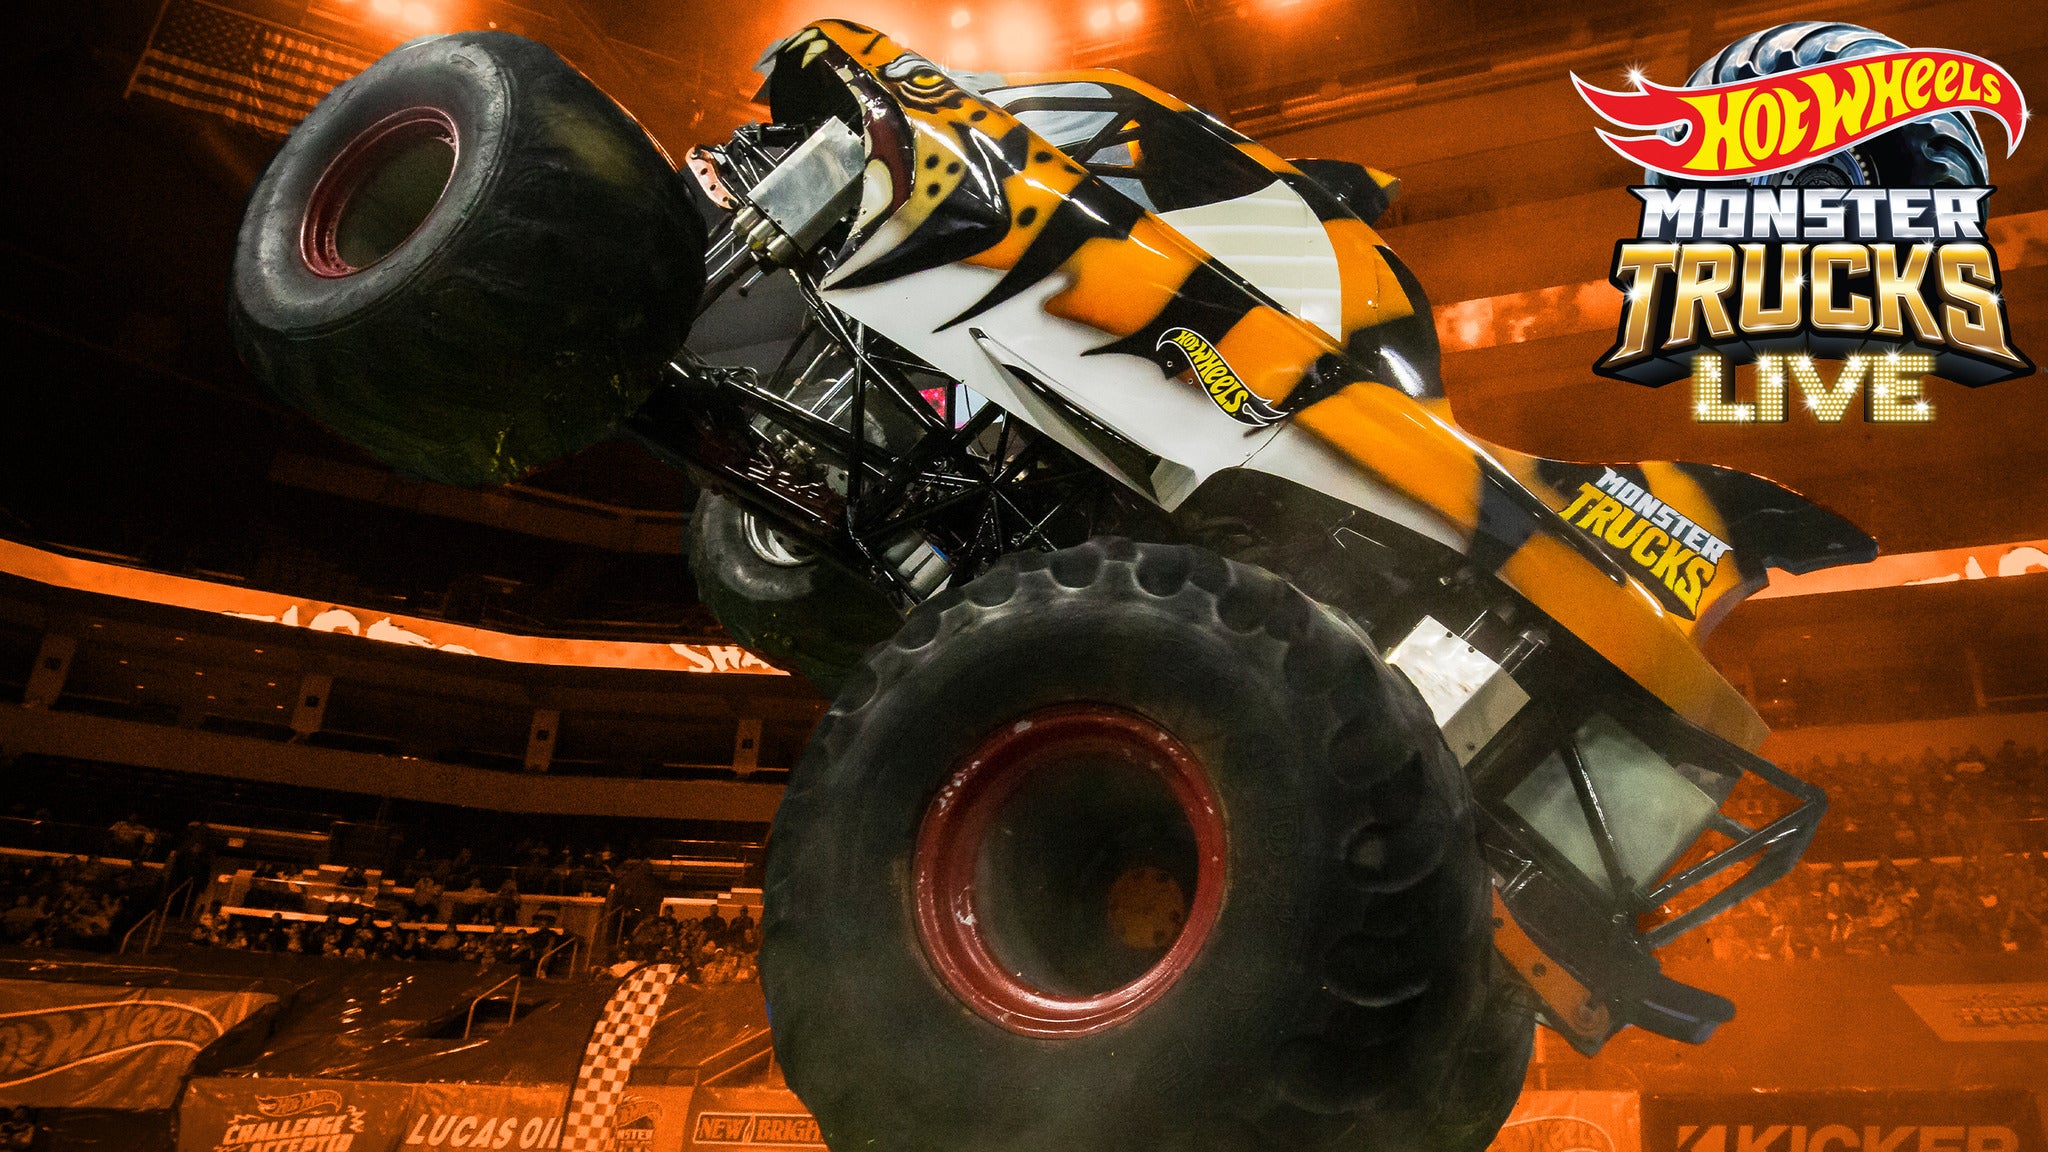 Hot Wheels Monster Trucks Live presale password for performance tickets in Rockford, IL (BMO Harris Bank Center)